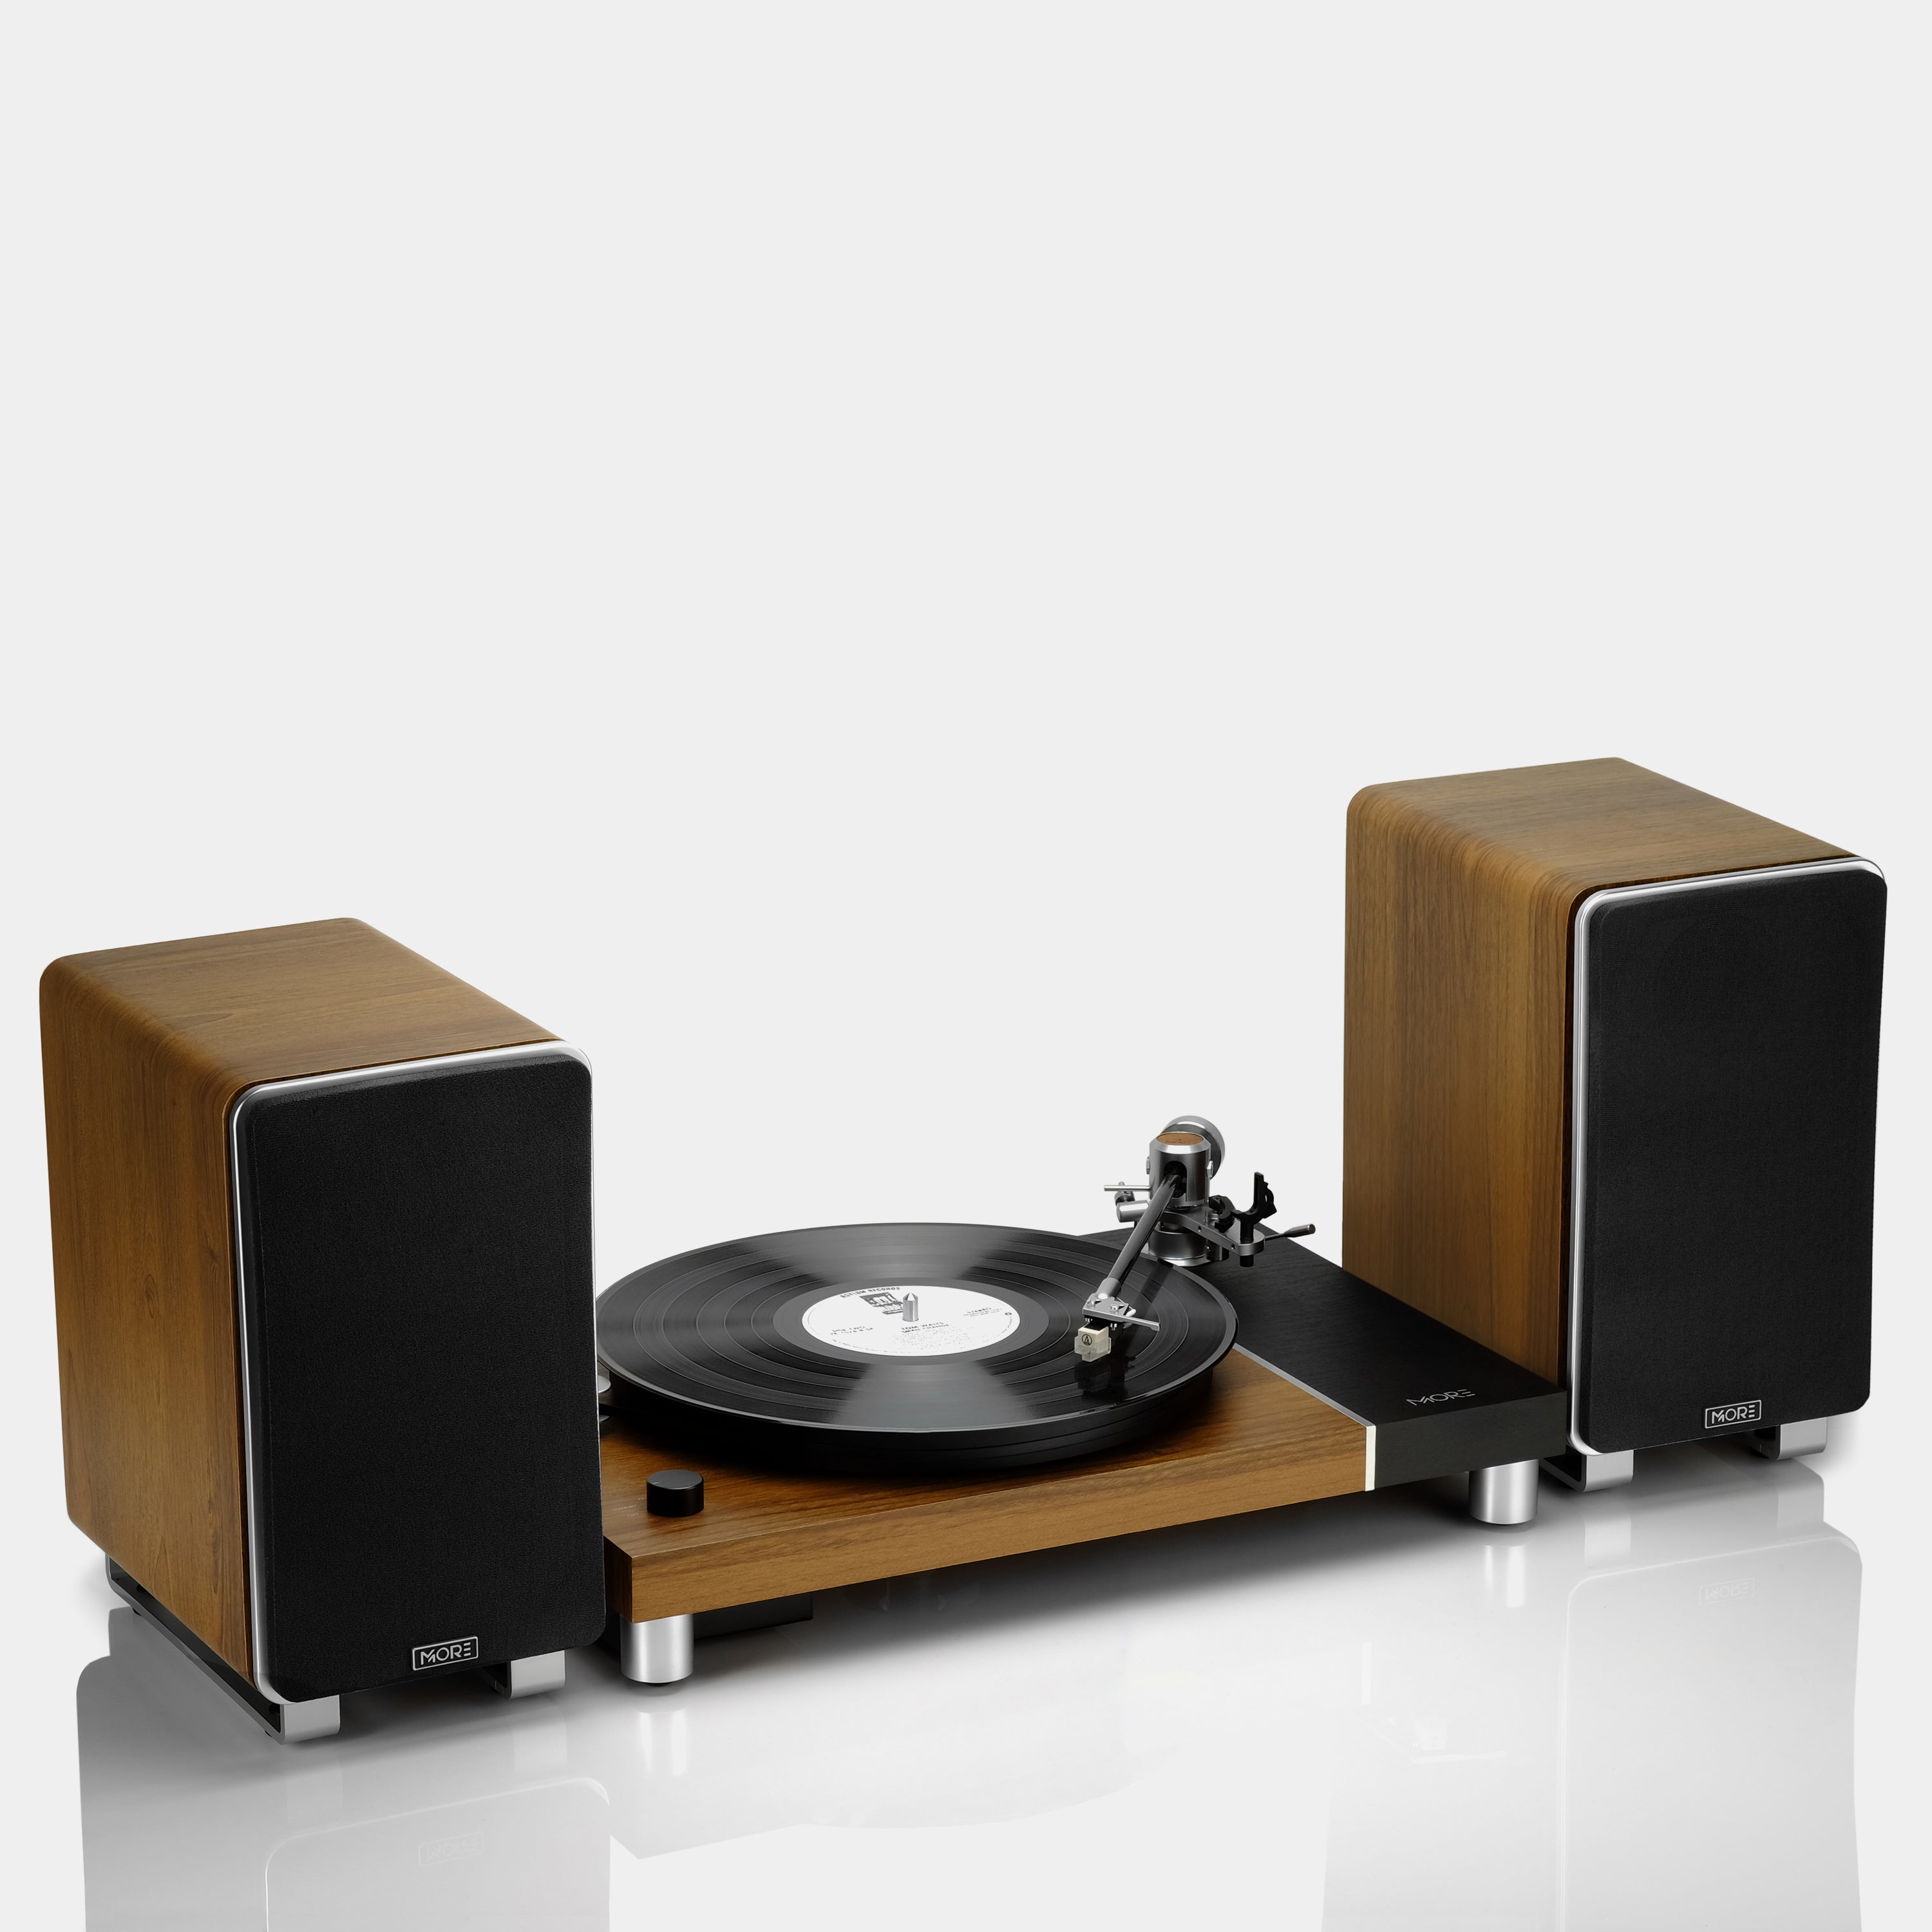 MORE HiFi Walnut Turntable with Speakers